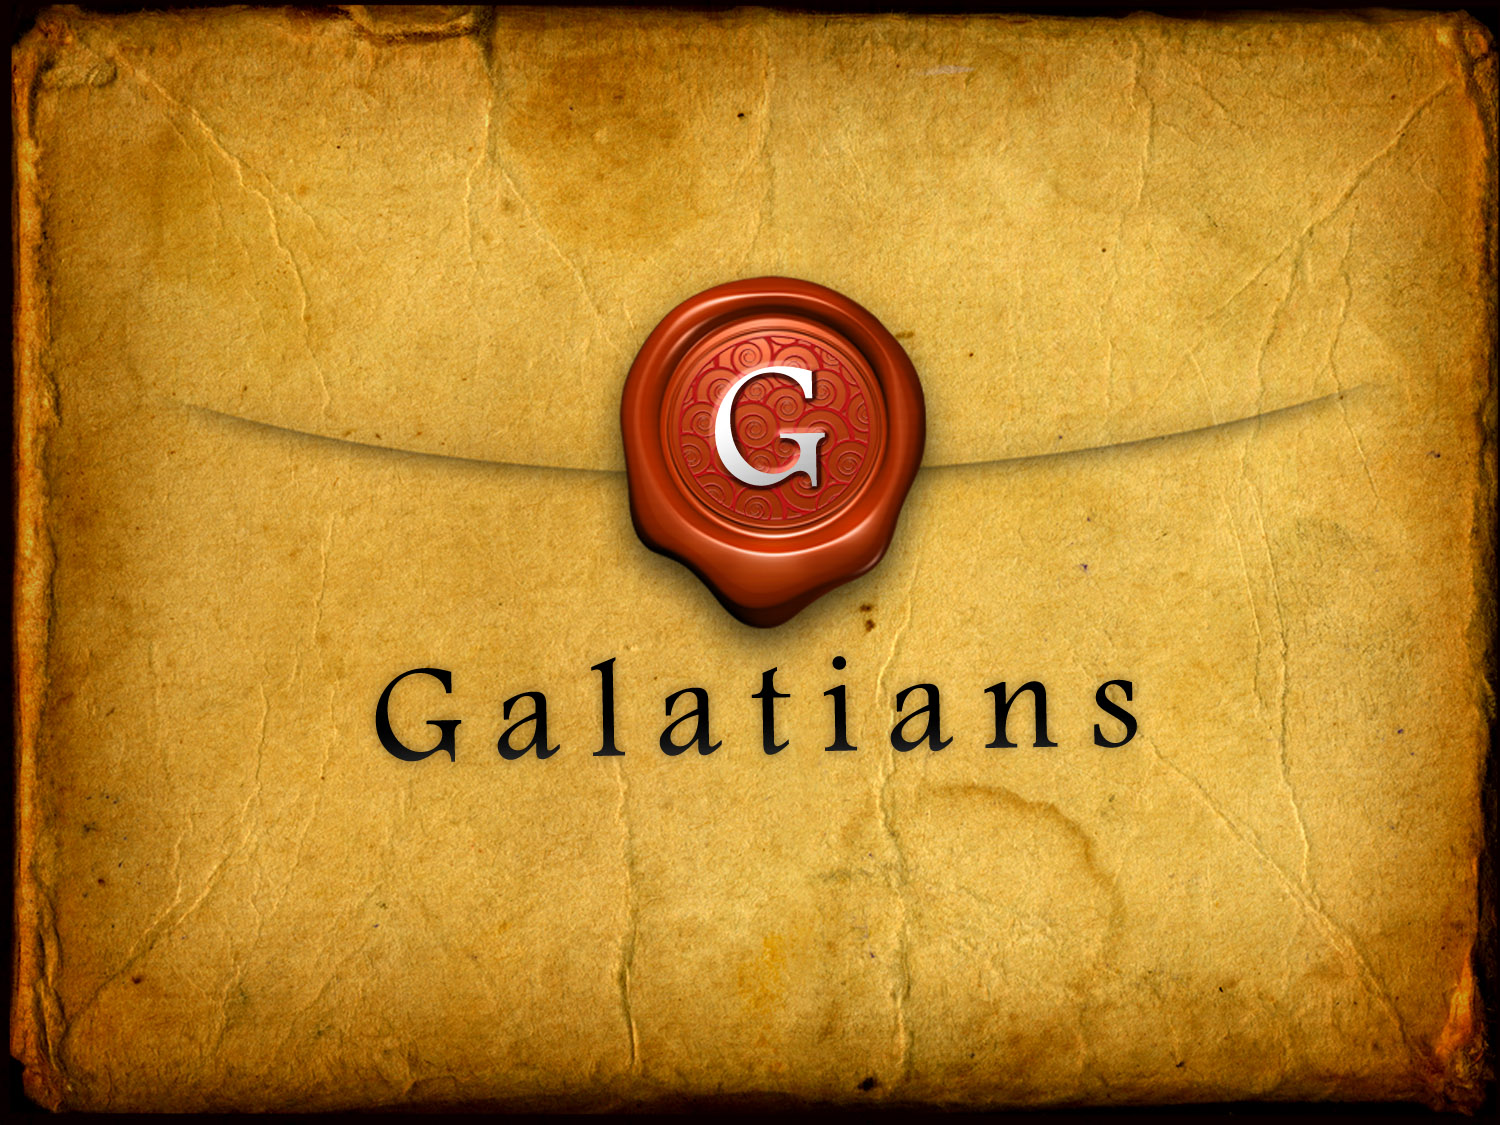 The Book of Galatians 5:10-15